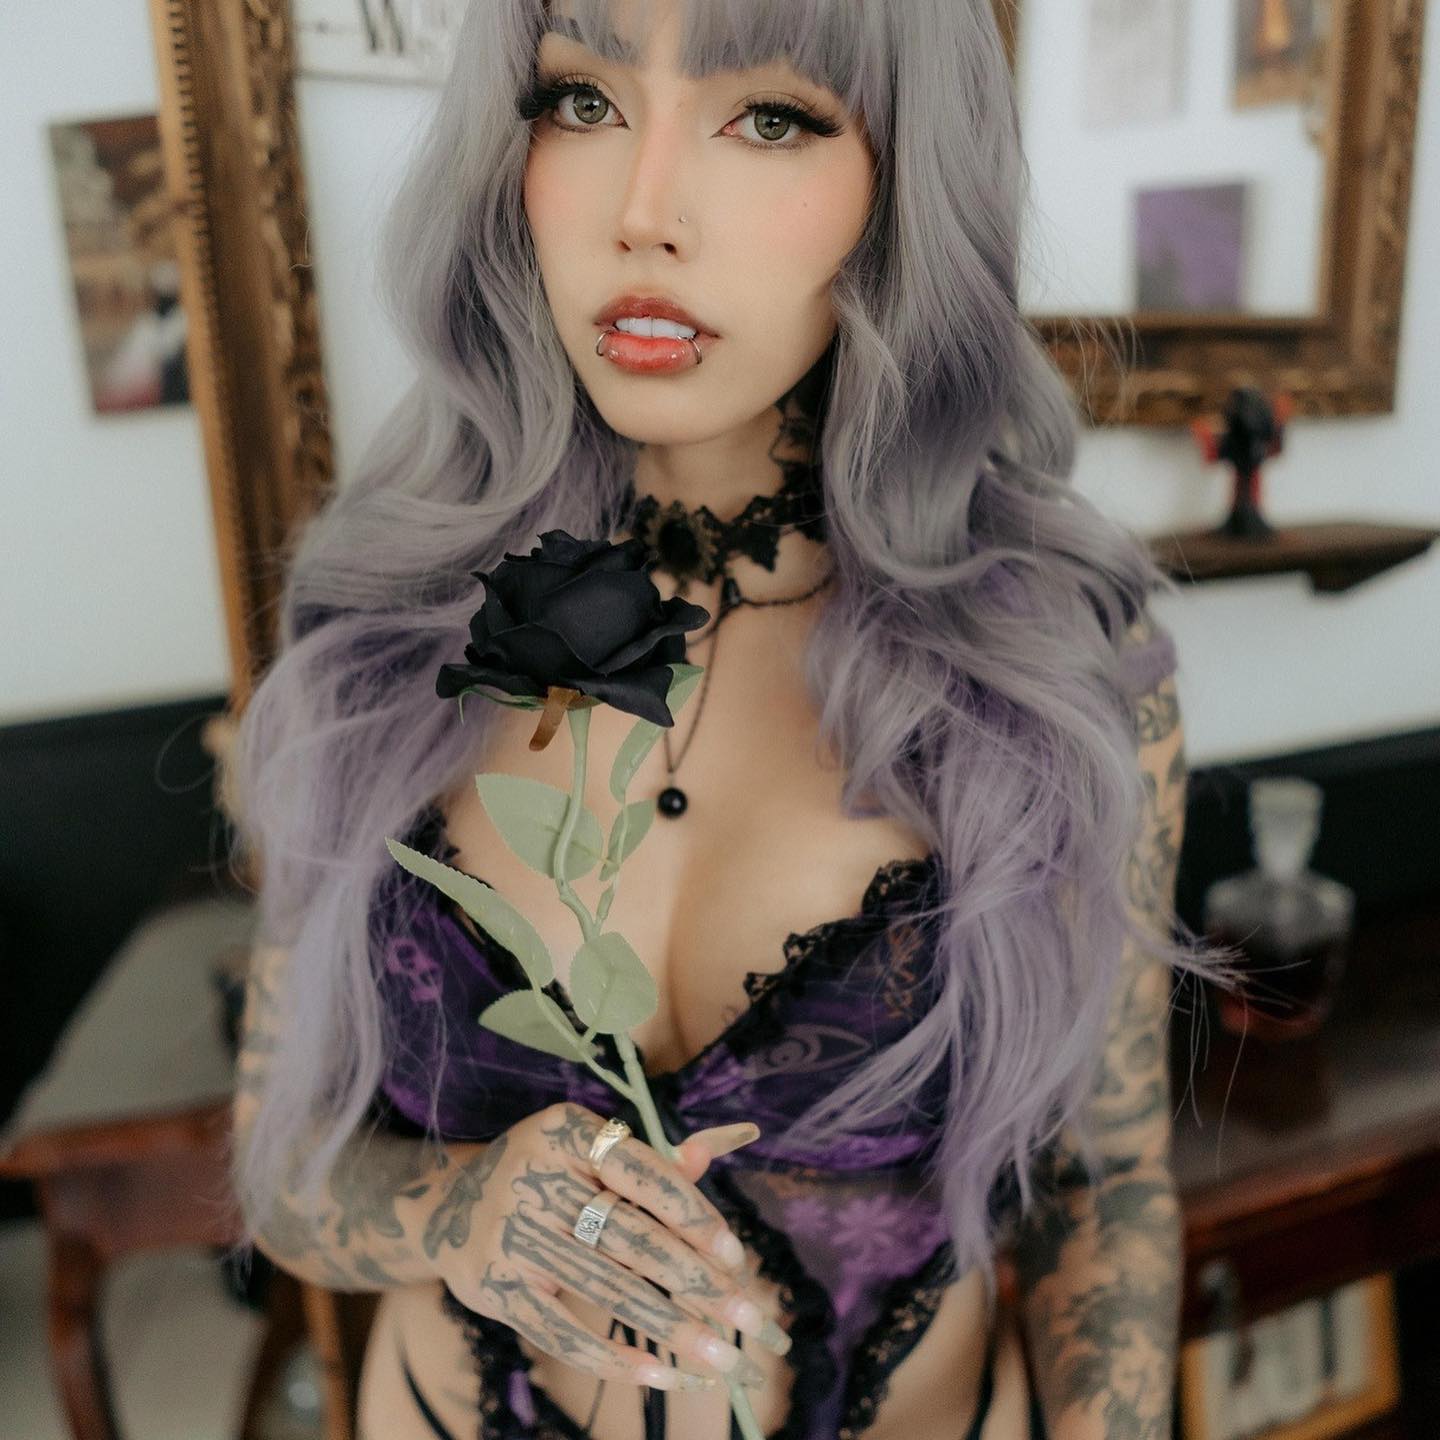 “Rosegarden Funeral of Sores” by Babu is now available on SuicideGirls.com 🧛🏻‍♀️🥀 show me some love on my new set!
.
.
.
.
.
.
.
.
#alt #alternative #altmodel #altgirl #gothgirl #tattoos #tattoomodel #tattoogirl #gothgirls